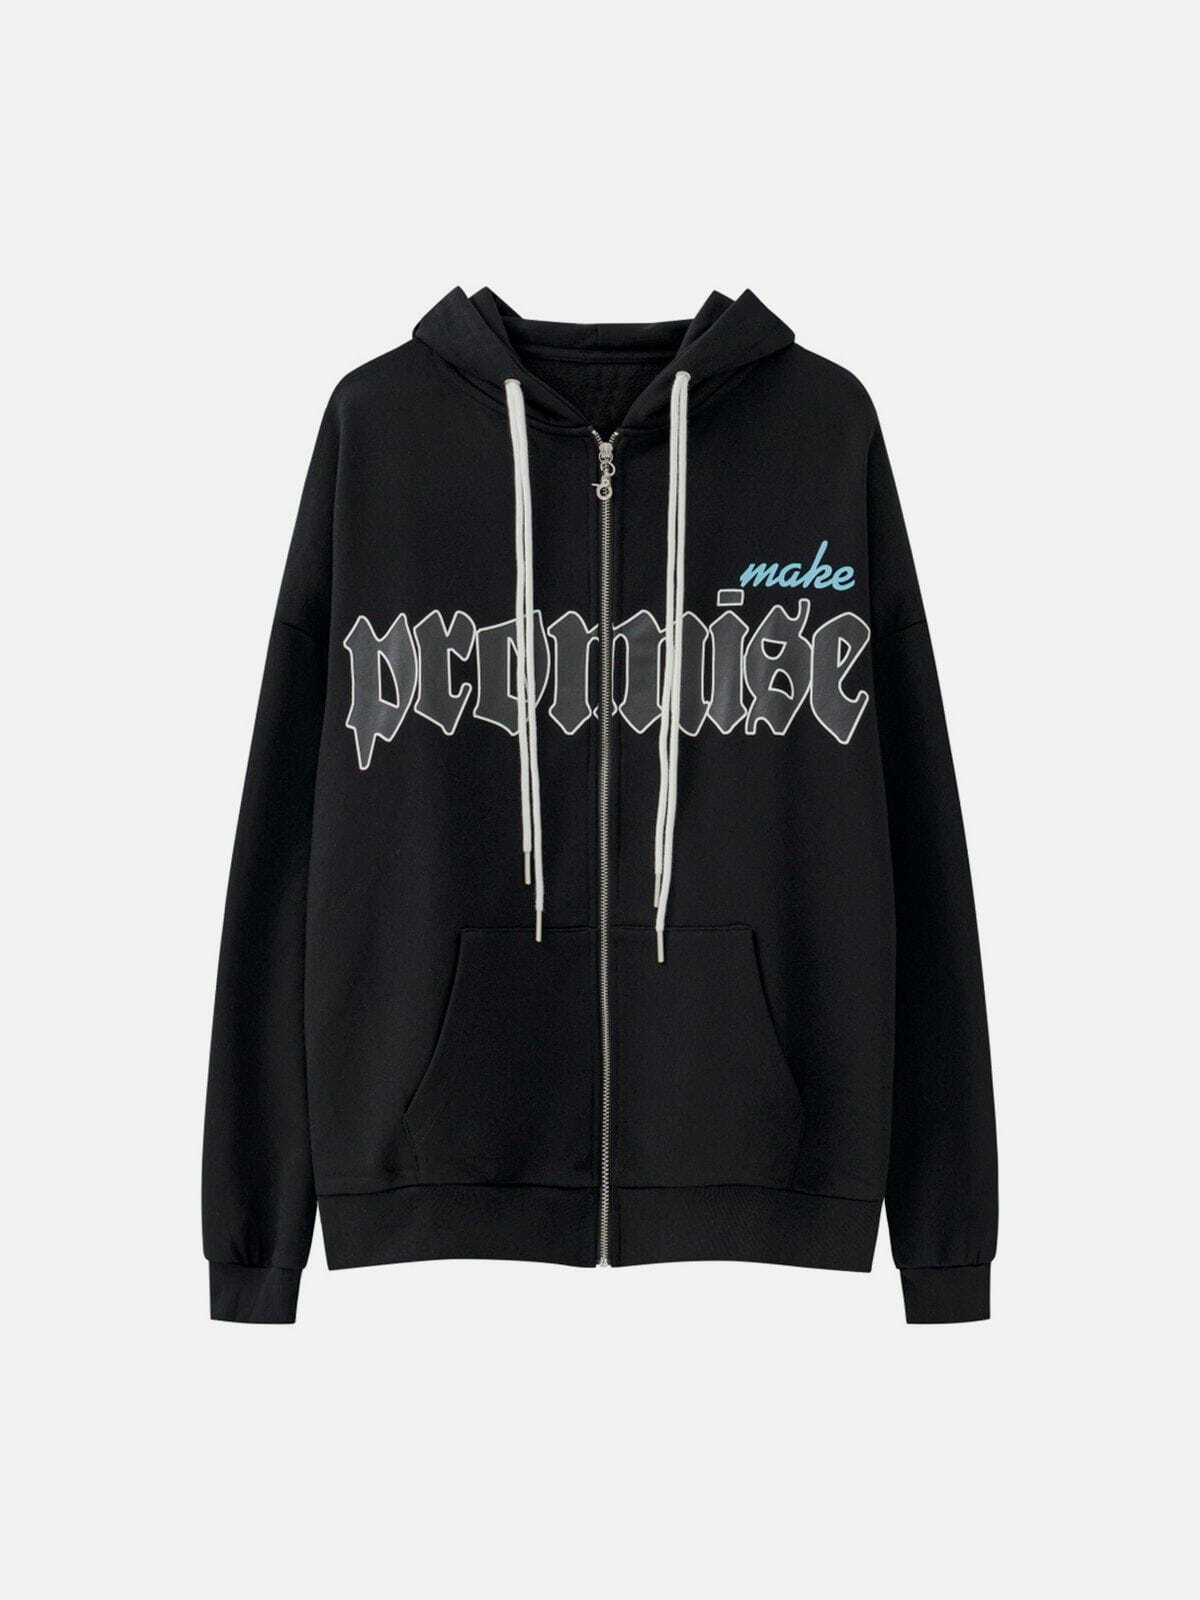 gothic letter number hoodie edgy & youthful streetwear 4317